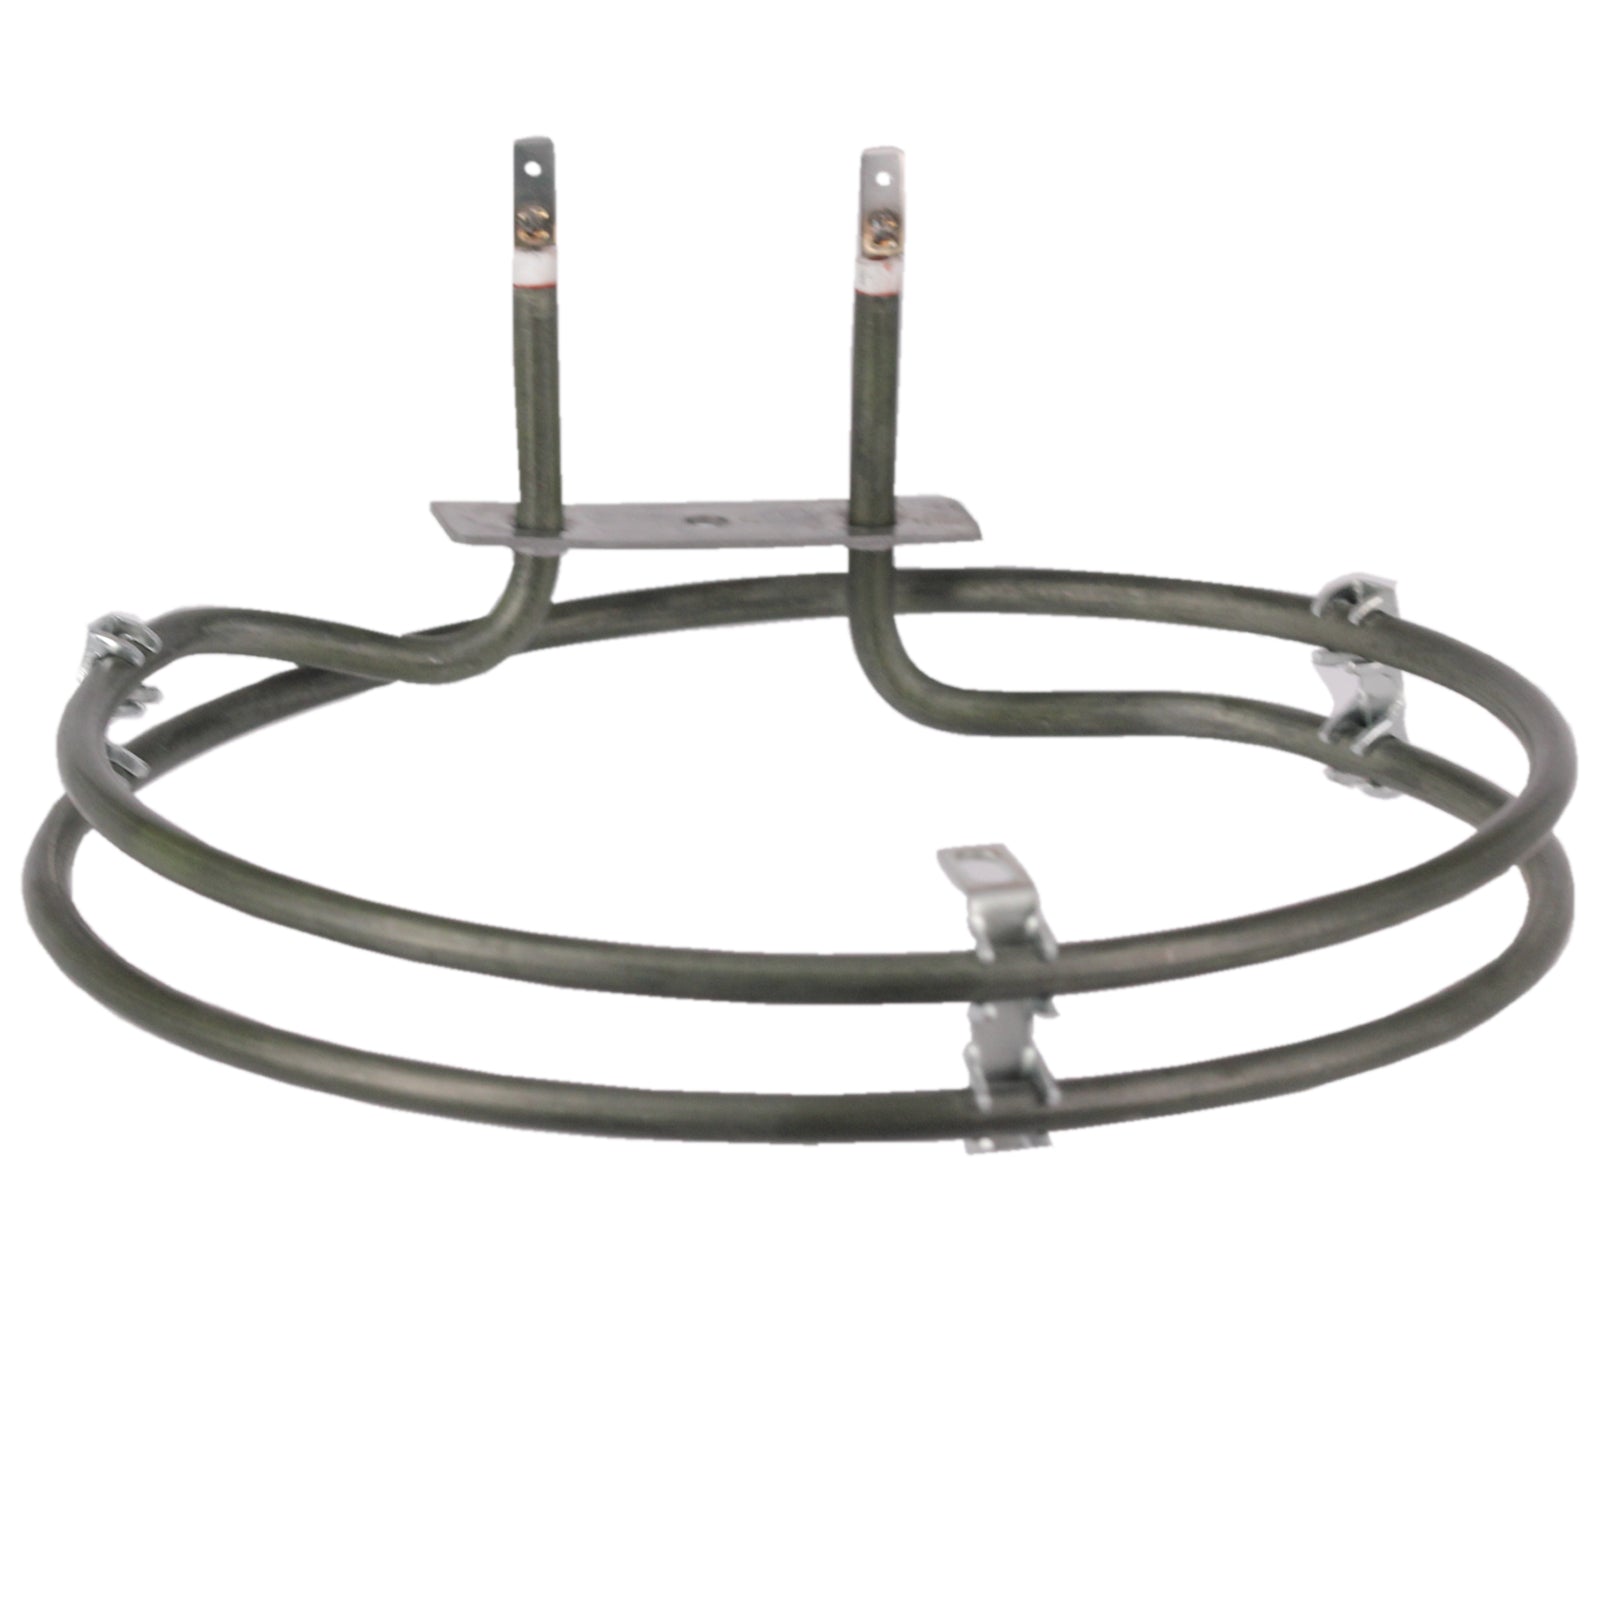 2 Turn Heating Element for Stoves Richmond Sterling Fan Oven (2000w)